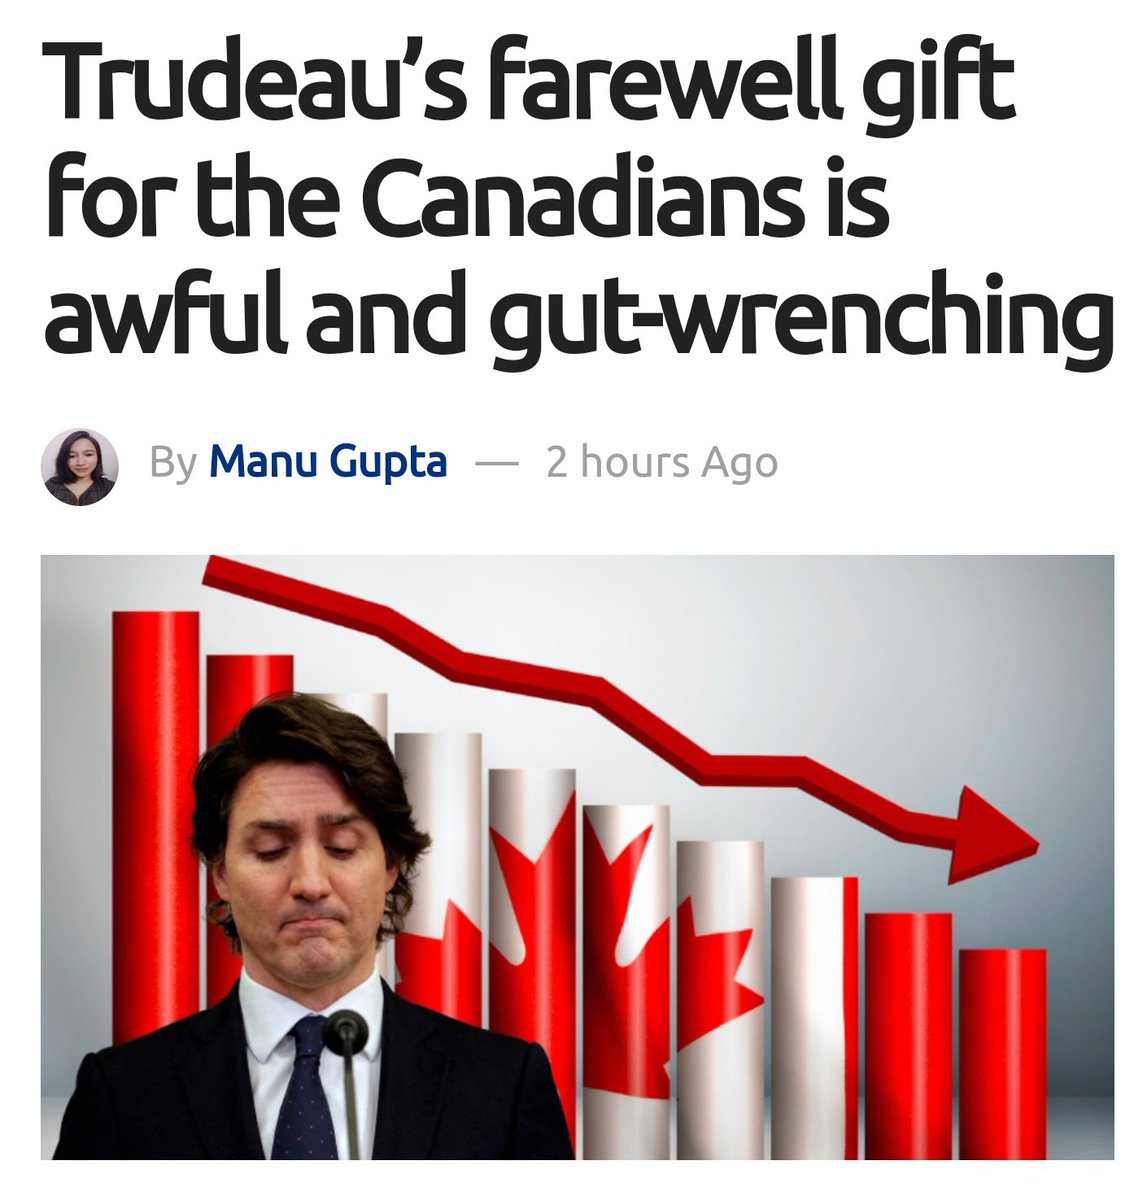 💥BOOM💥MUST READ💥Trudeau is a 'DESTROYER OF DEMAND' WITH FEDERAL GOV MISSPENDING, record-high jobless rates, INCREASES CARBON TAX, INCREASING GOVERNMENT RESTRICTIONS ON ENERGY & DESTROYS THE TOURISM SECTOR WITH TRUDEAUS DICTATORSHIP APP ArriveCAN. tfiglobalnews.com/2022/09/10/tru…